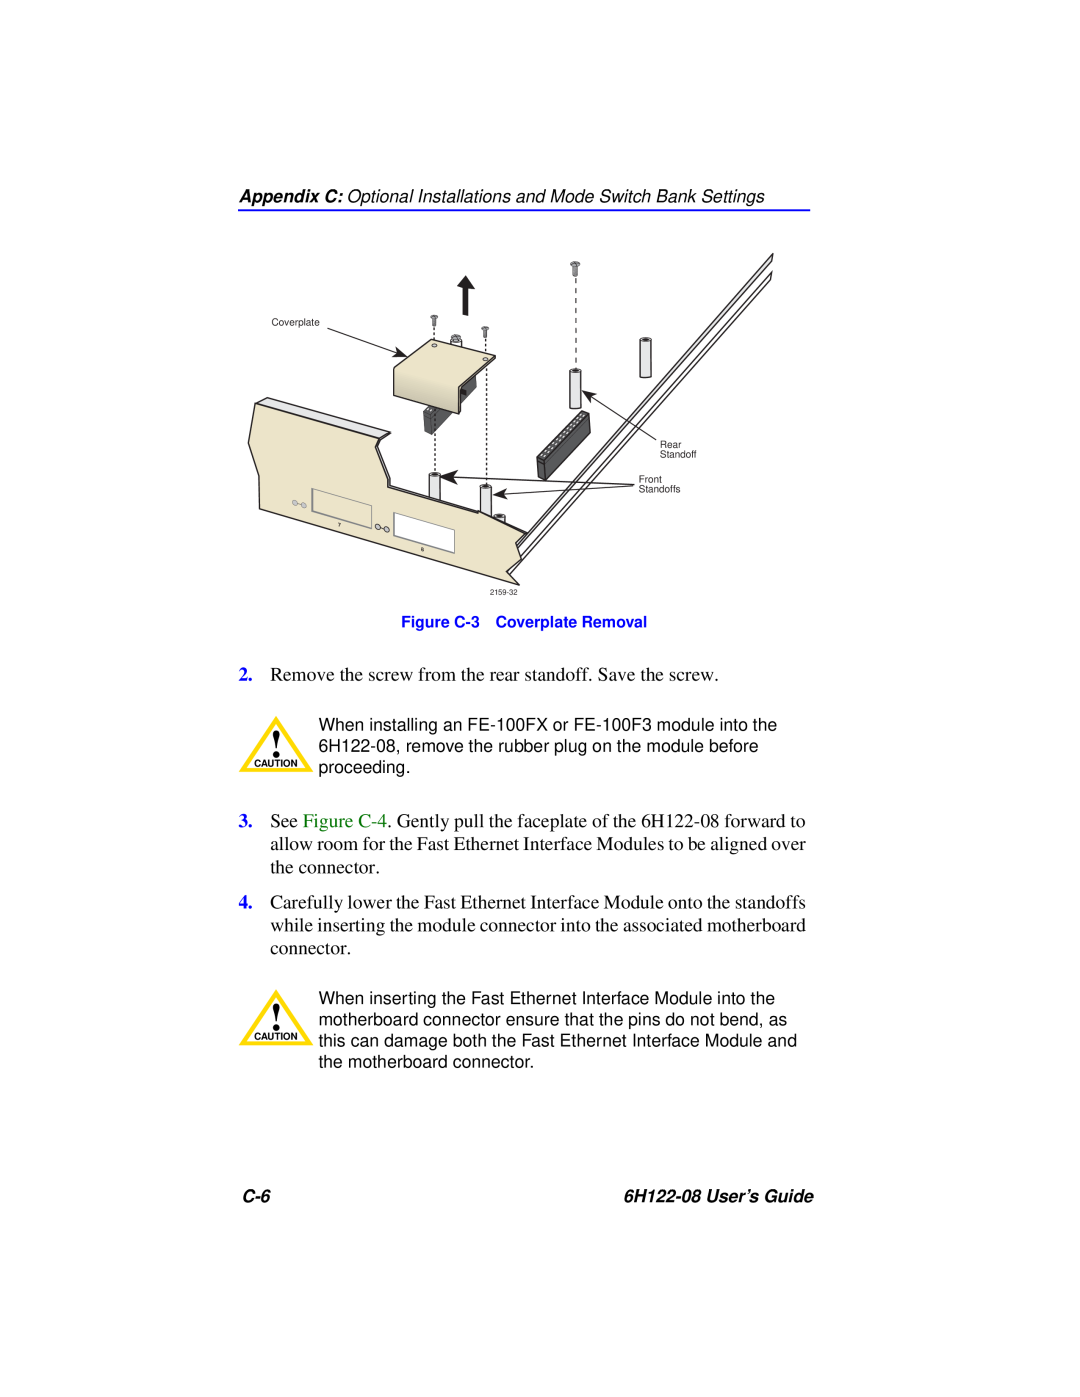 Cabletron Systems 6H122-08 manual Remove the screw from the rear standoff. Save the screw 